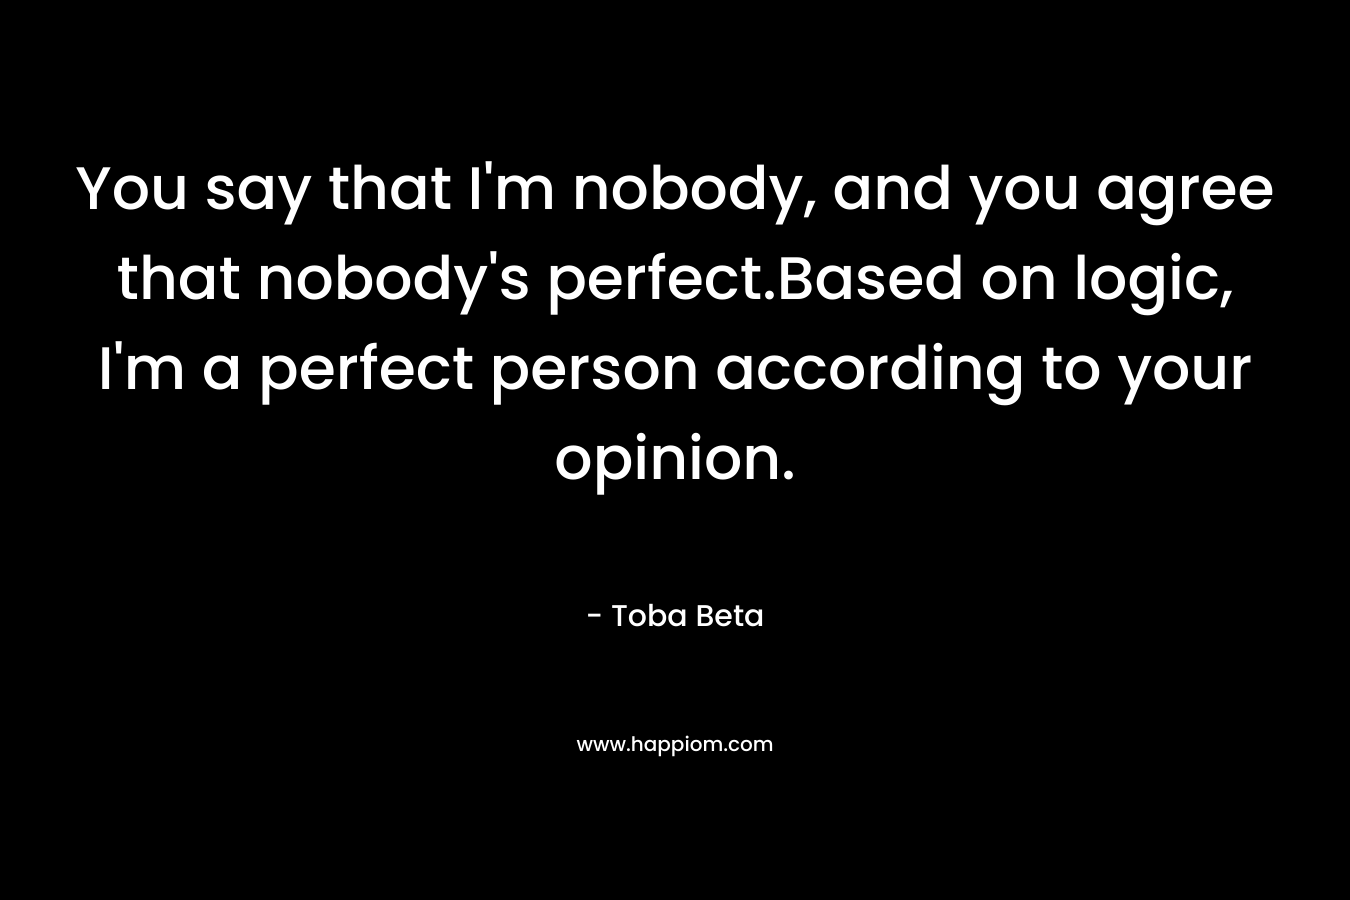 You say that I'm nobody, and you agree that nobody's perfect.Based on logic, I'm a perfect person according to your opinion.